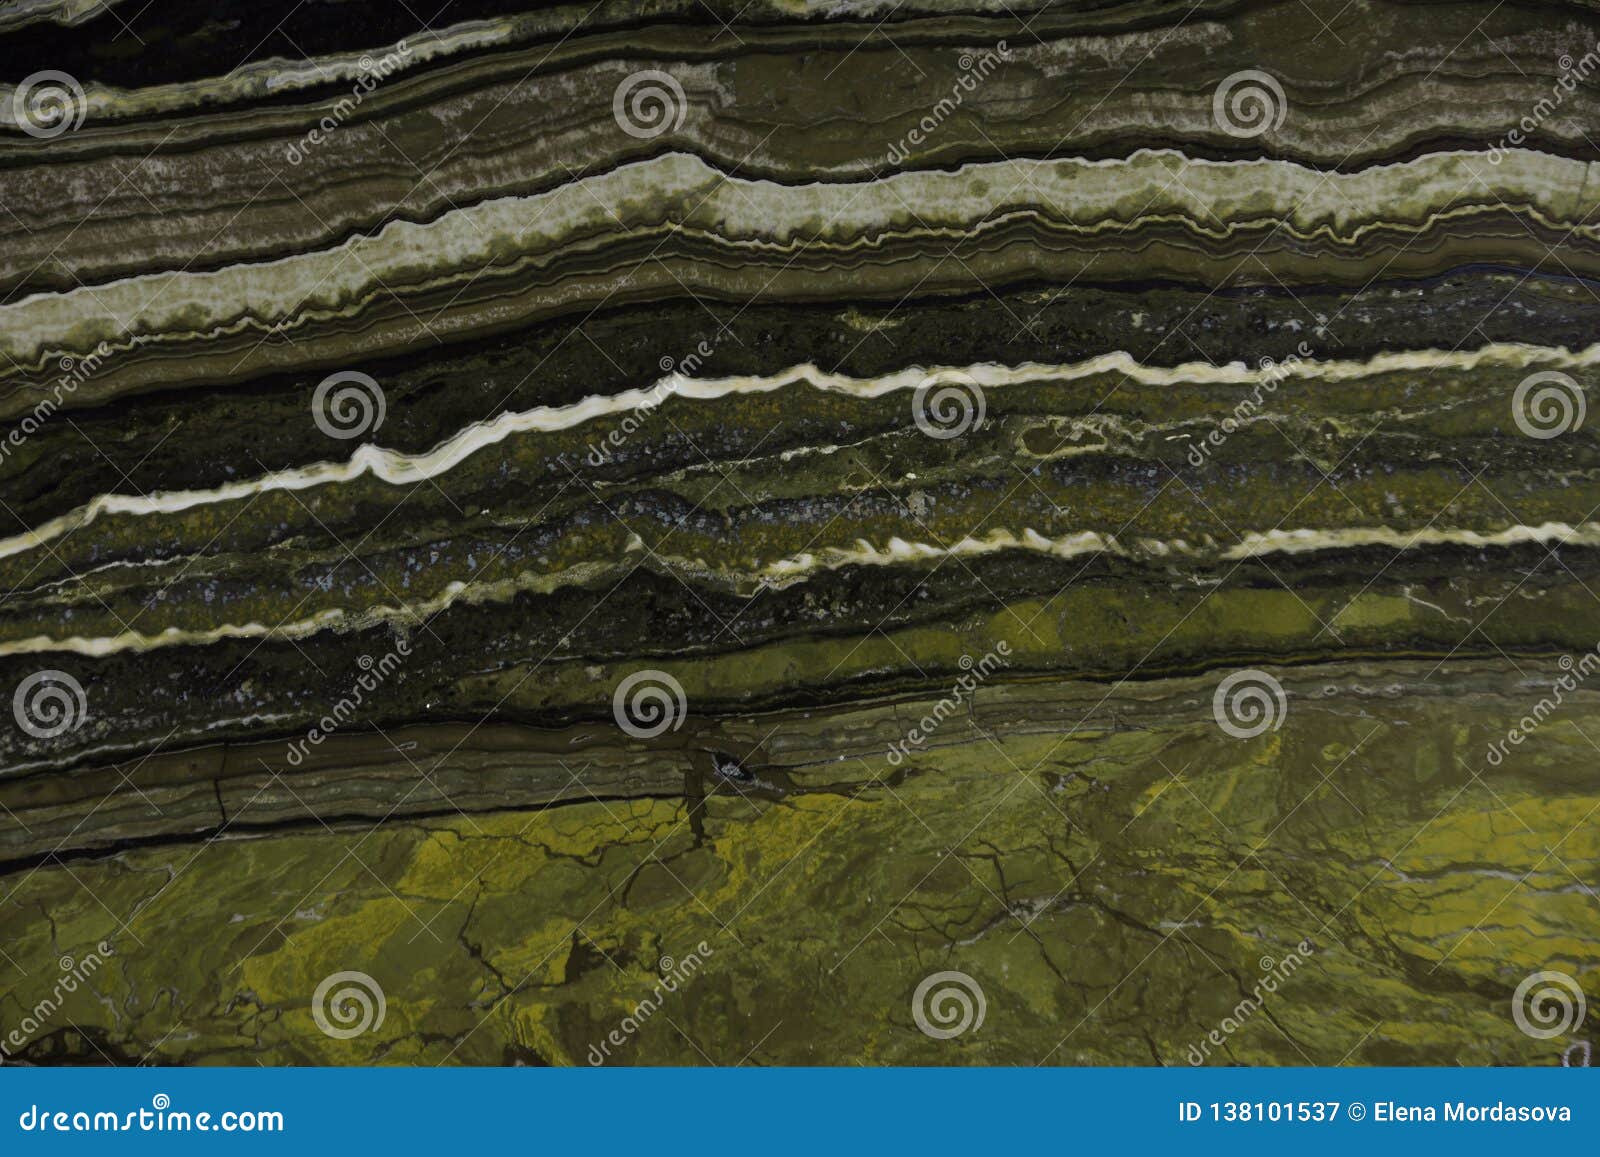 interesting texture of the stone with stripes, onice fantastico